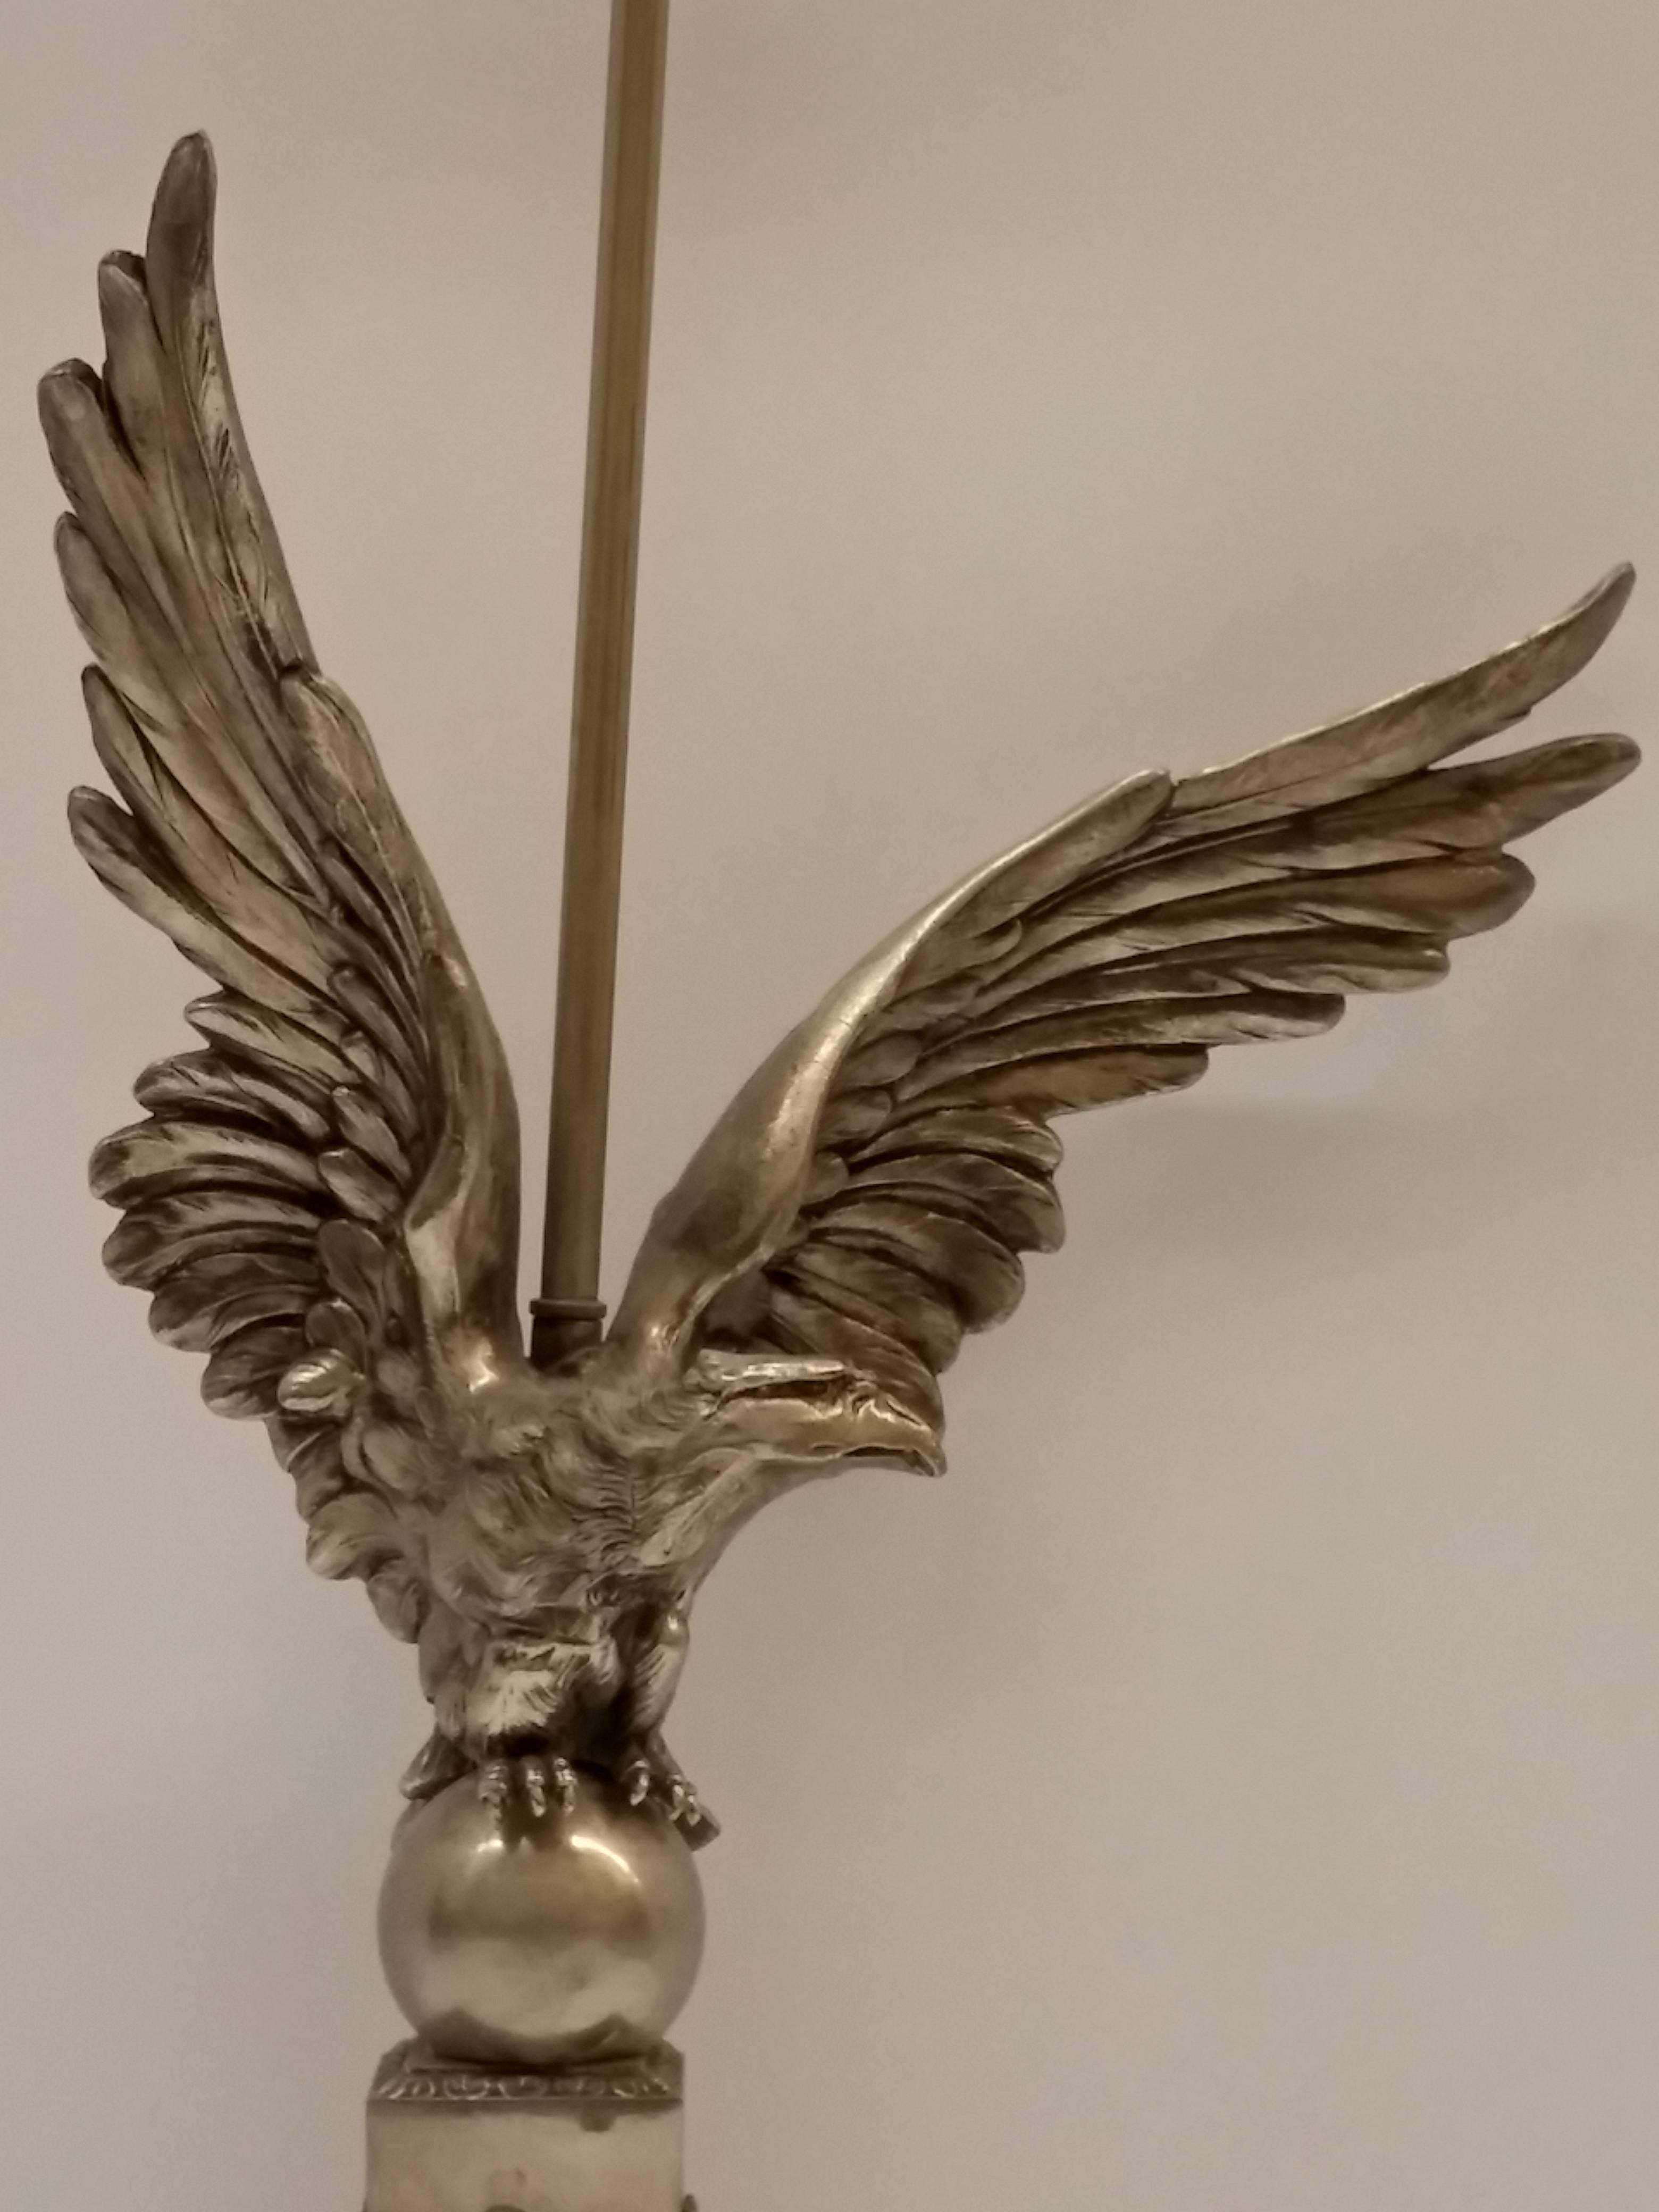 A French Art Deco Eagle motif table, desk lamp in nickeled bronze with light Black Patina in great condition. Complimentary drop-off to the tri-state area. We are the rare source that specializes exclusively in French Art Deco for over three